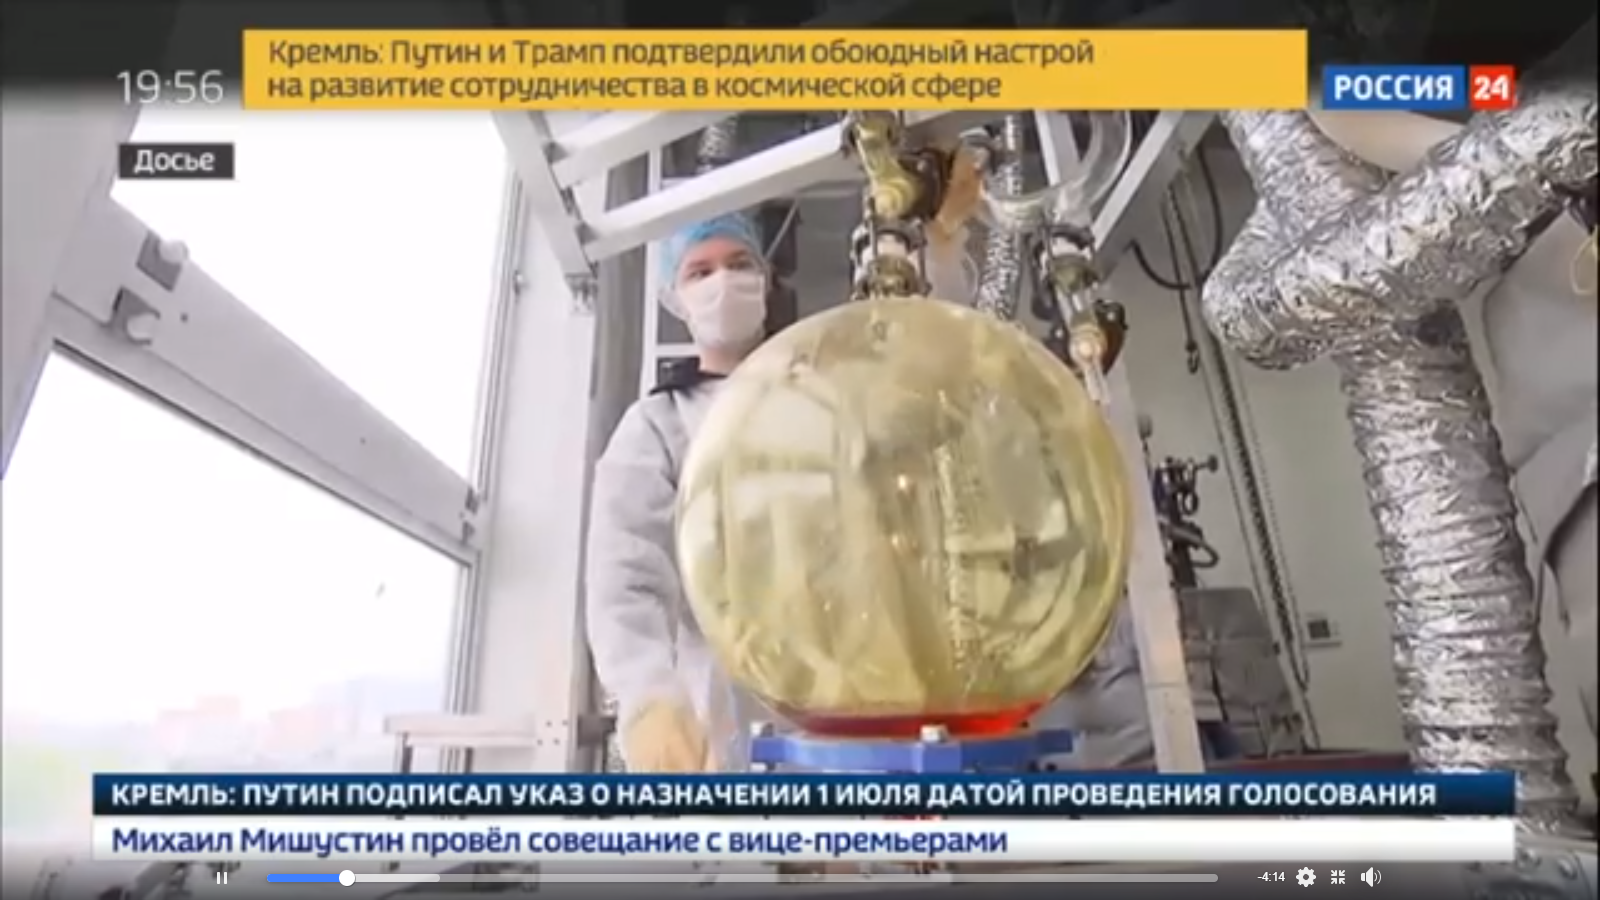 The miraculous miracle! How Russia 24 TV Channel disclosed japanese discovery as Russian